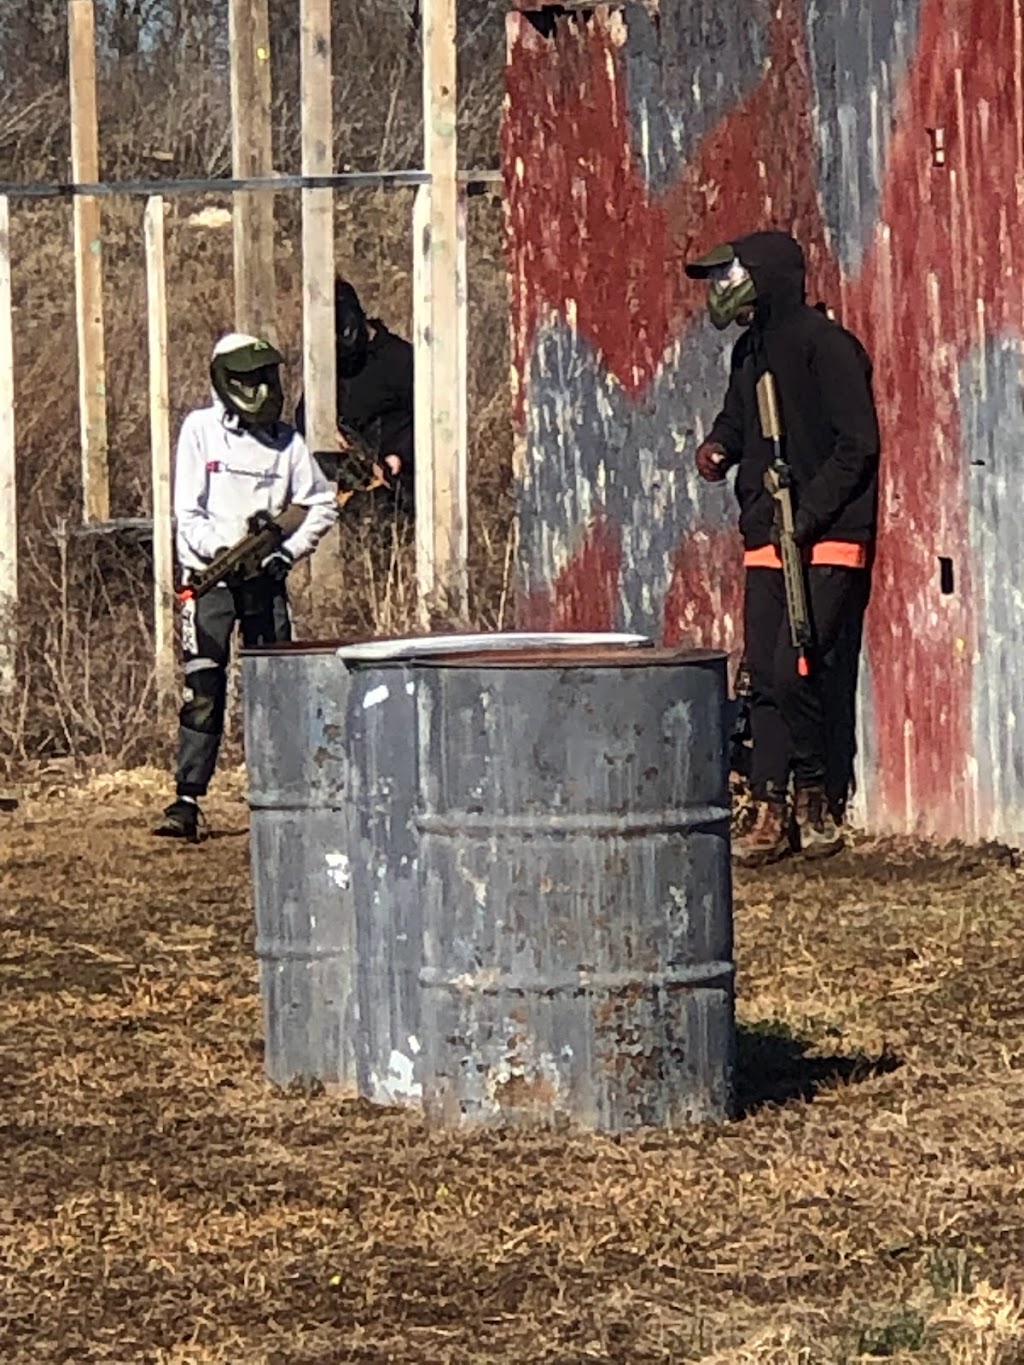 Paintball/Airsoft Indiana | 6109 S U.S Hwy 31 #100, Franklin, IN 46131 | Phone: (765) 516-4854